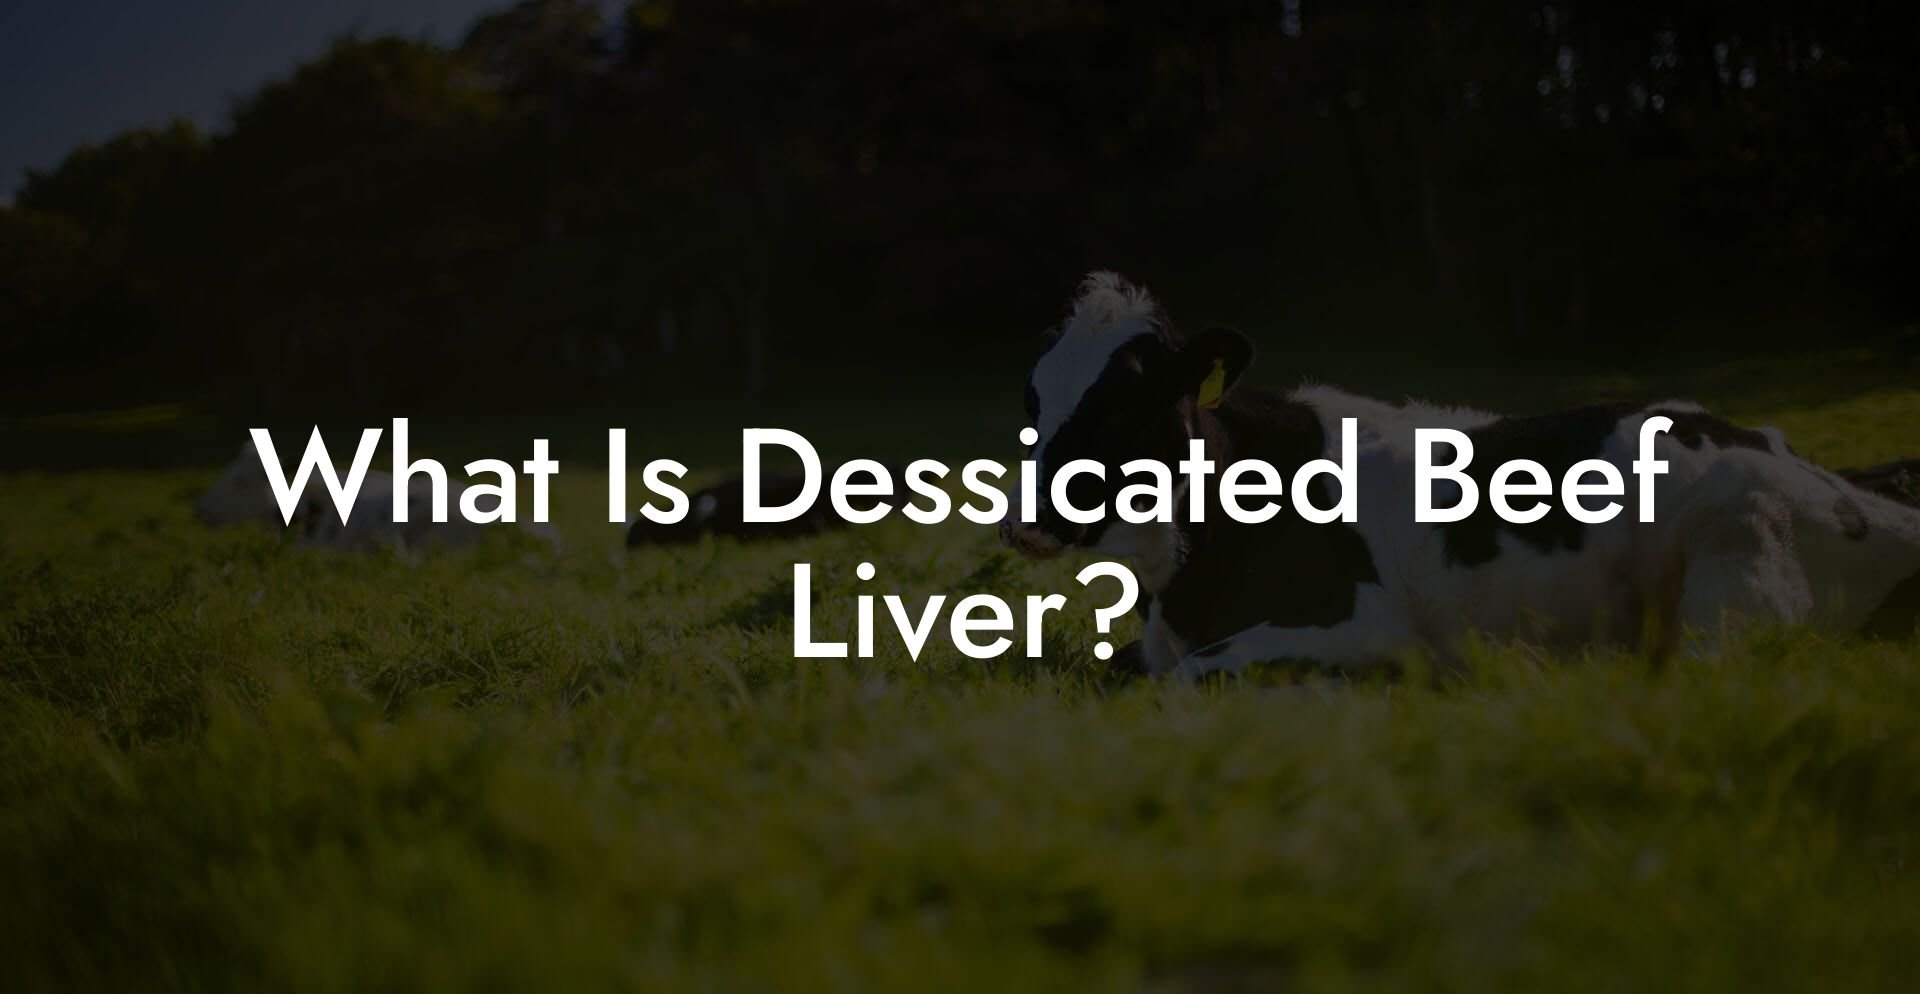 What Is Dessicated Beef Liver?